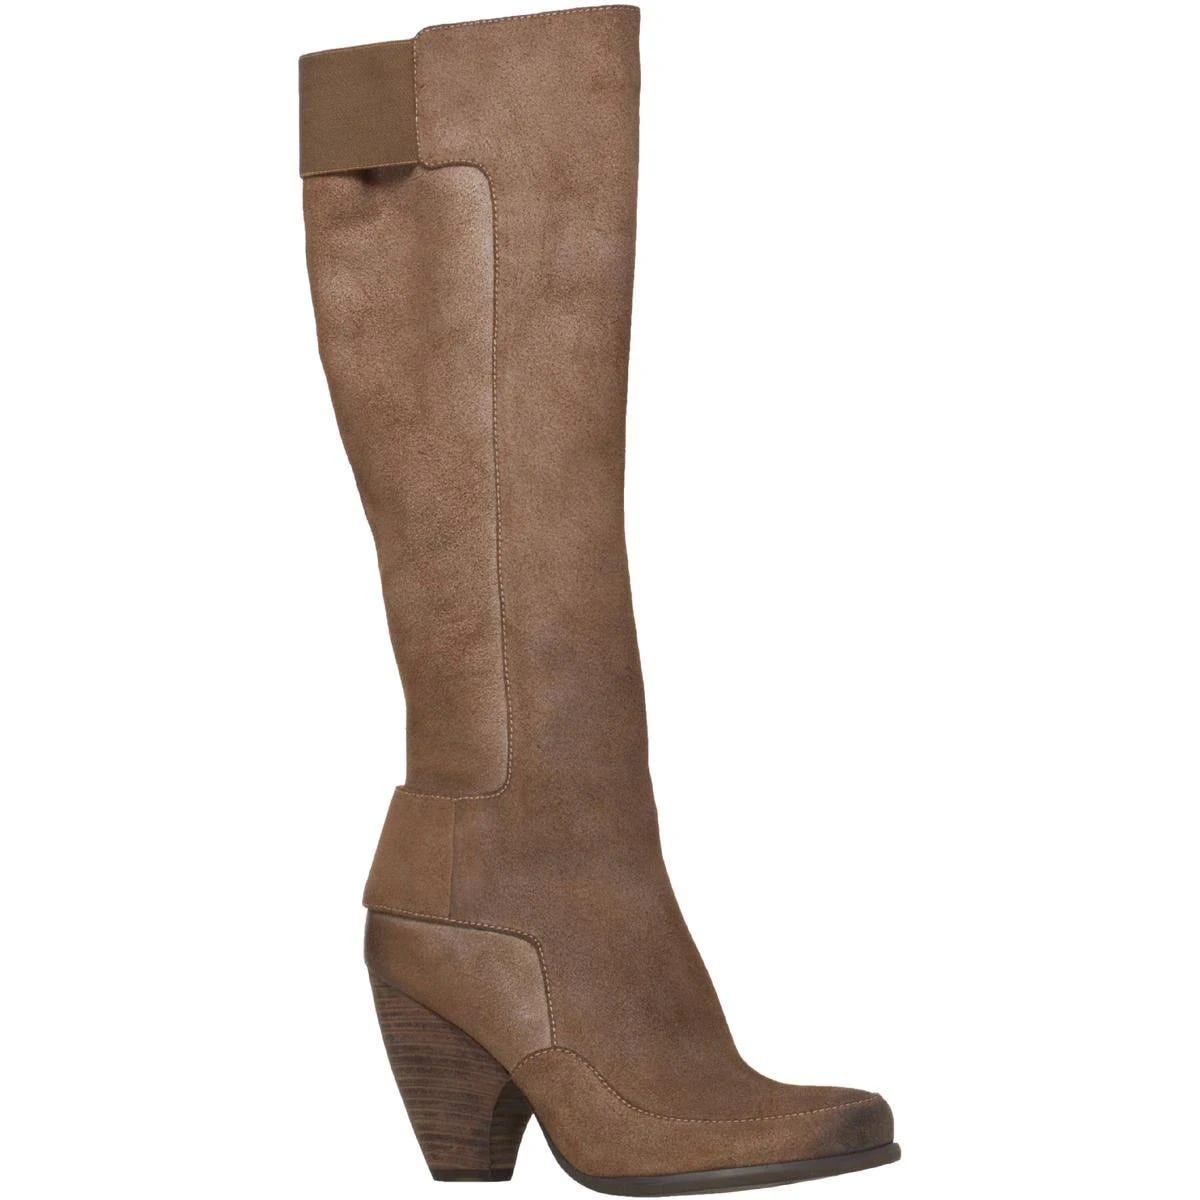 Knee-High Suede Stacked Heel Boot with Classic Design | Image